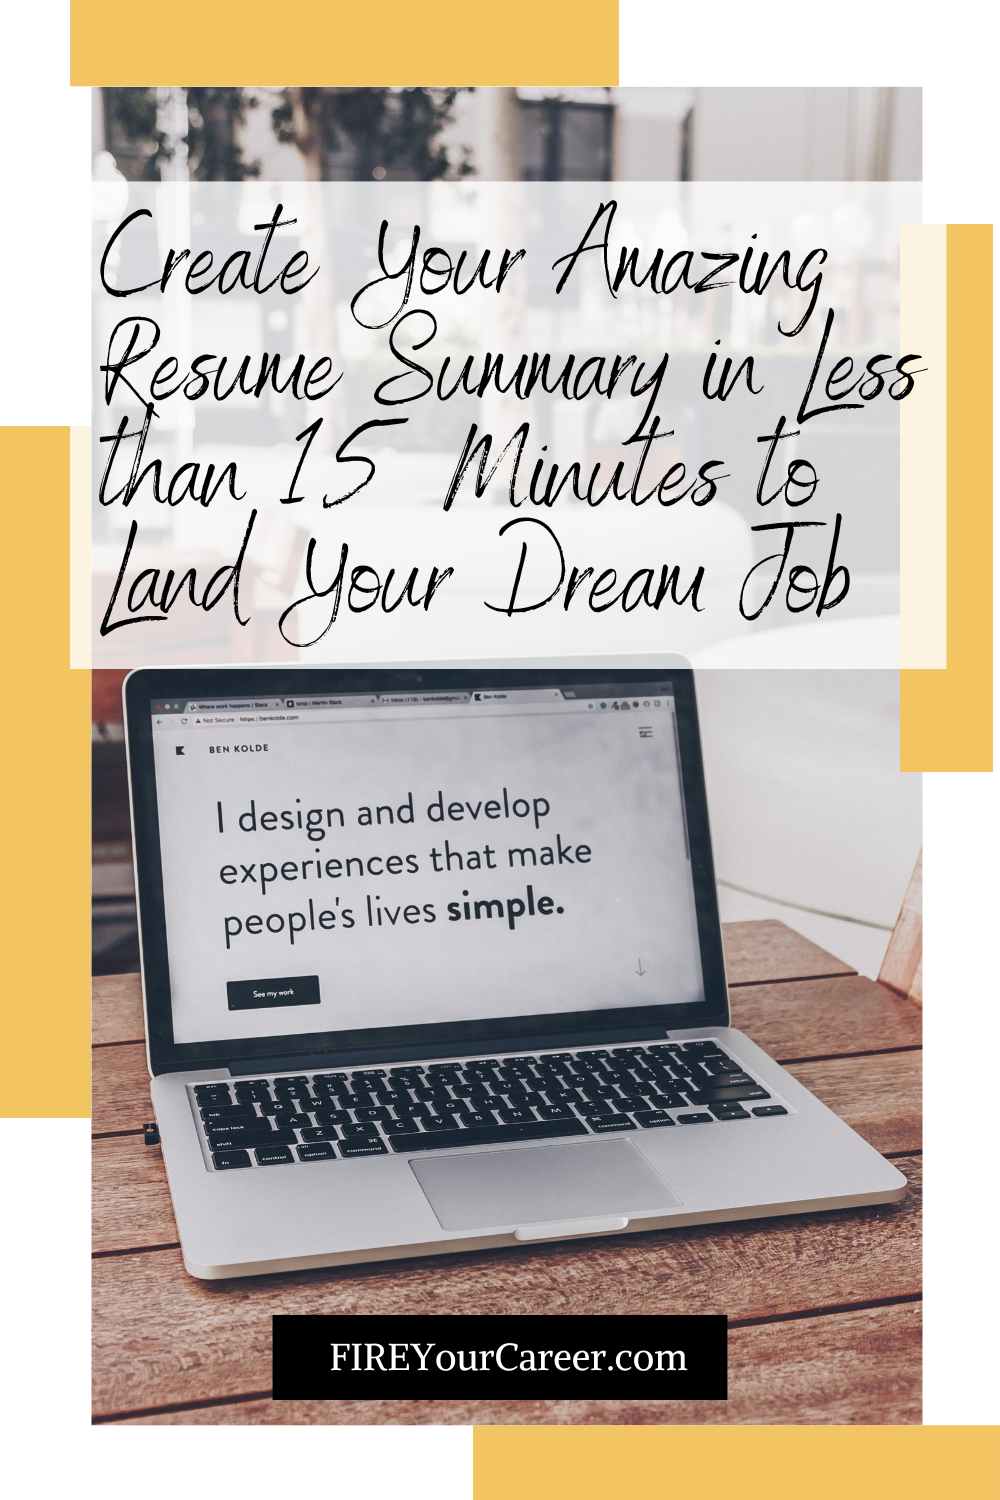 V2 Create Your Amazing Resume Summary in Less than 15 Minutes to Land Your Dream Job Pinterest (1)